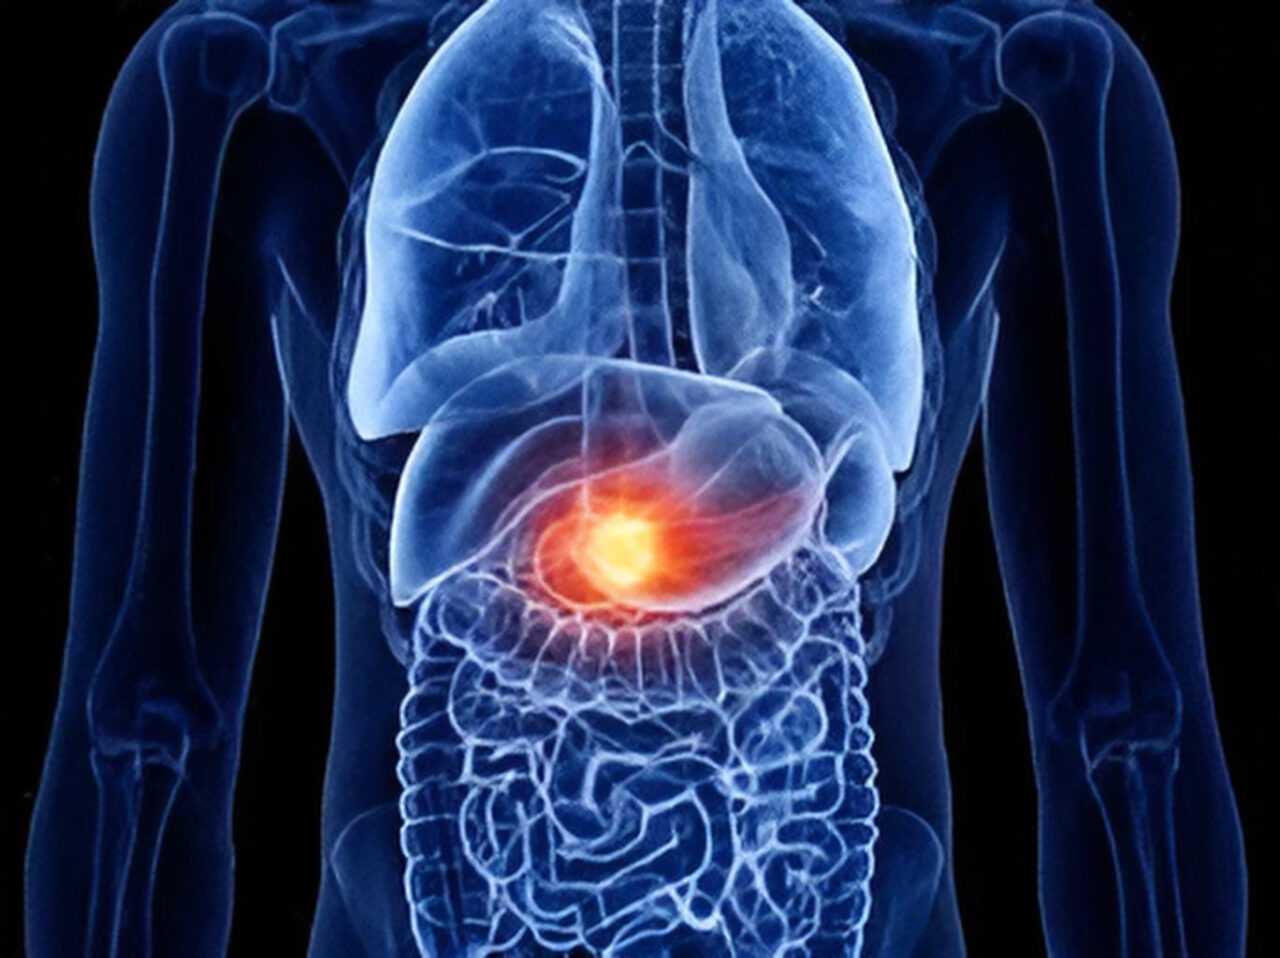 Johns Hopkins scientists training AI to improve early detection rates of pancreatic cancer